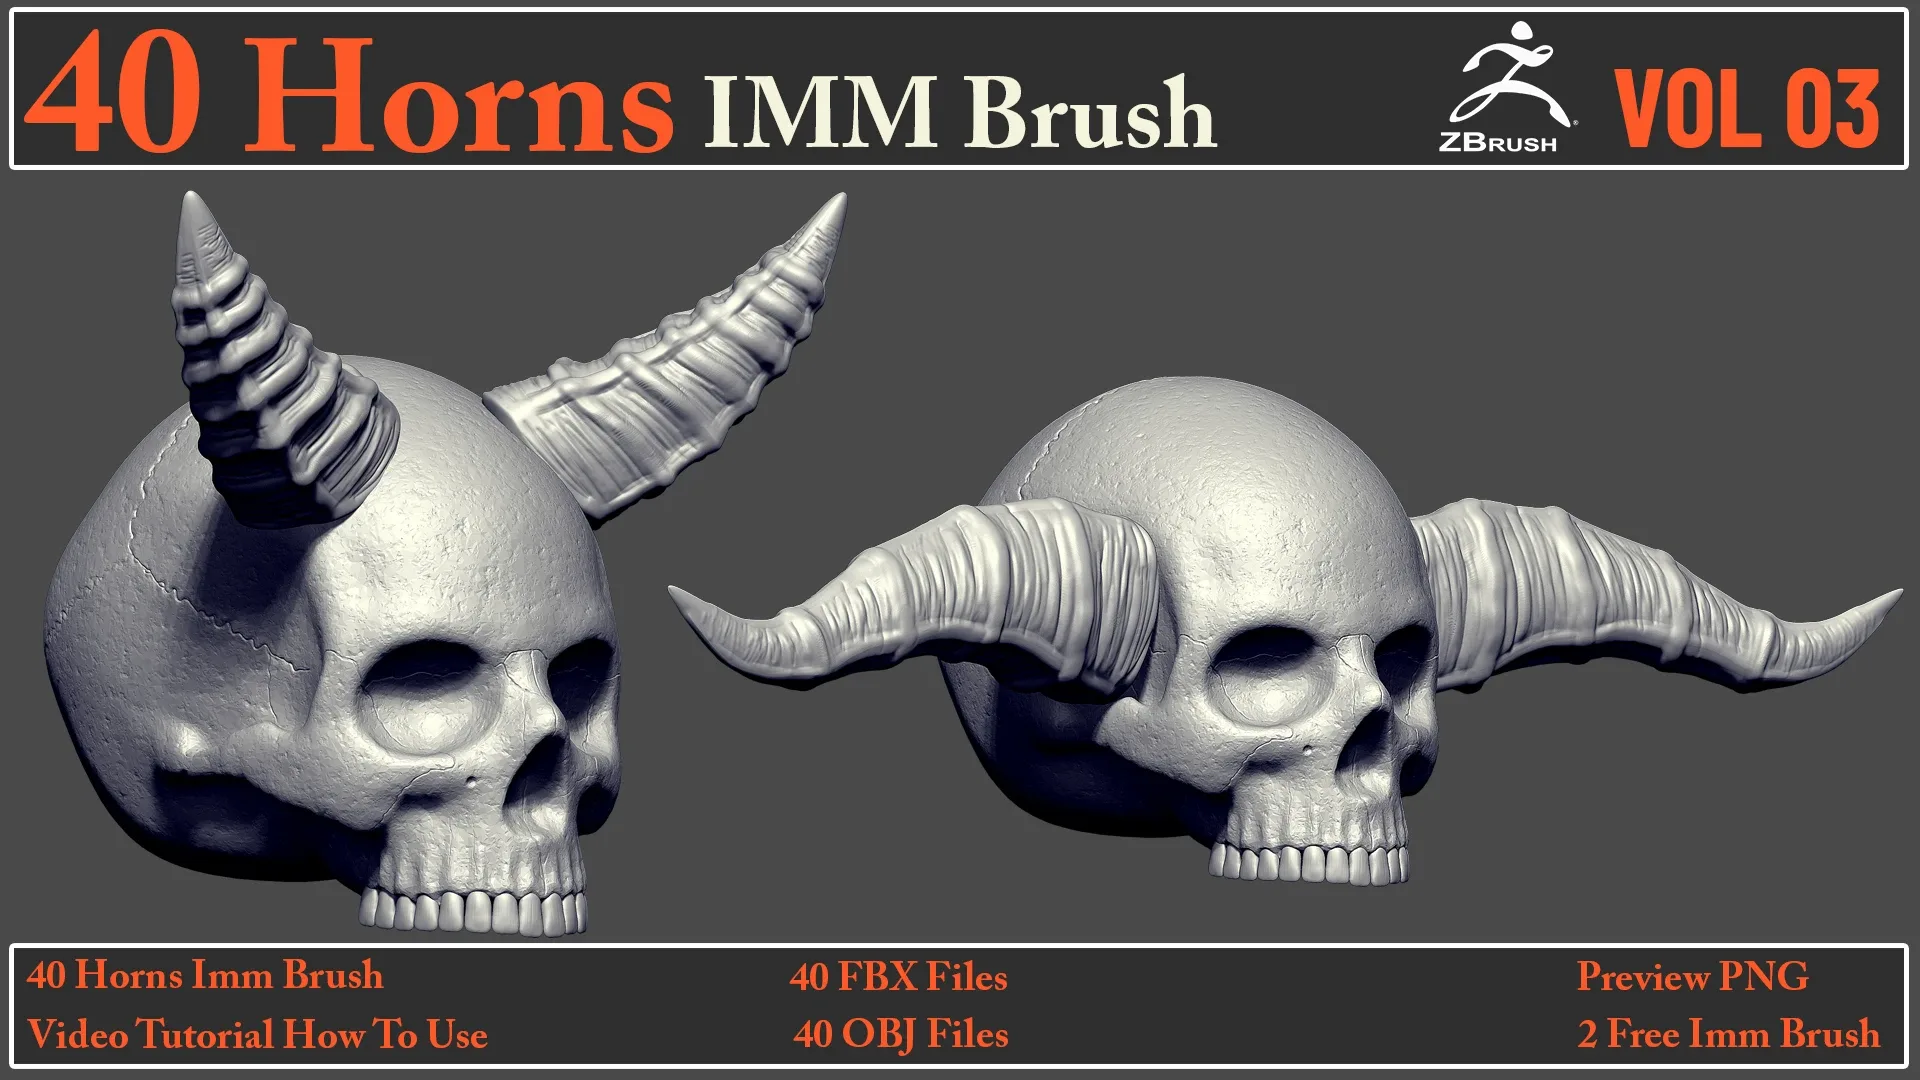 40 Horns IMM Brush VOL 03 + 40 FBX & OBJ Files + Video How To Use